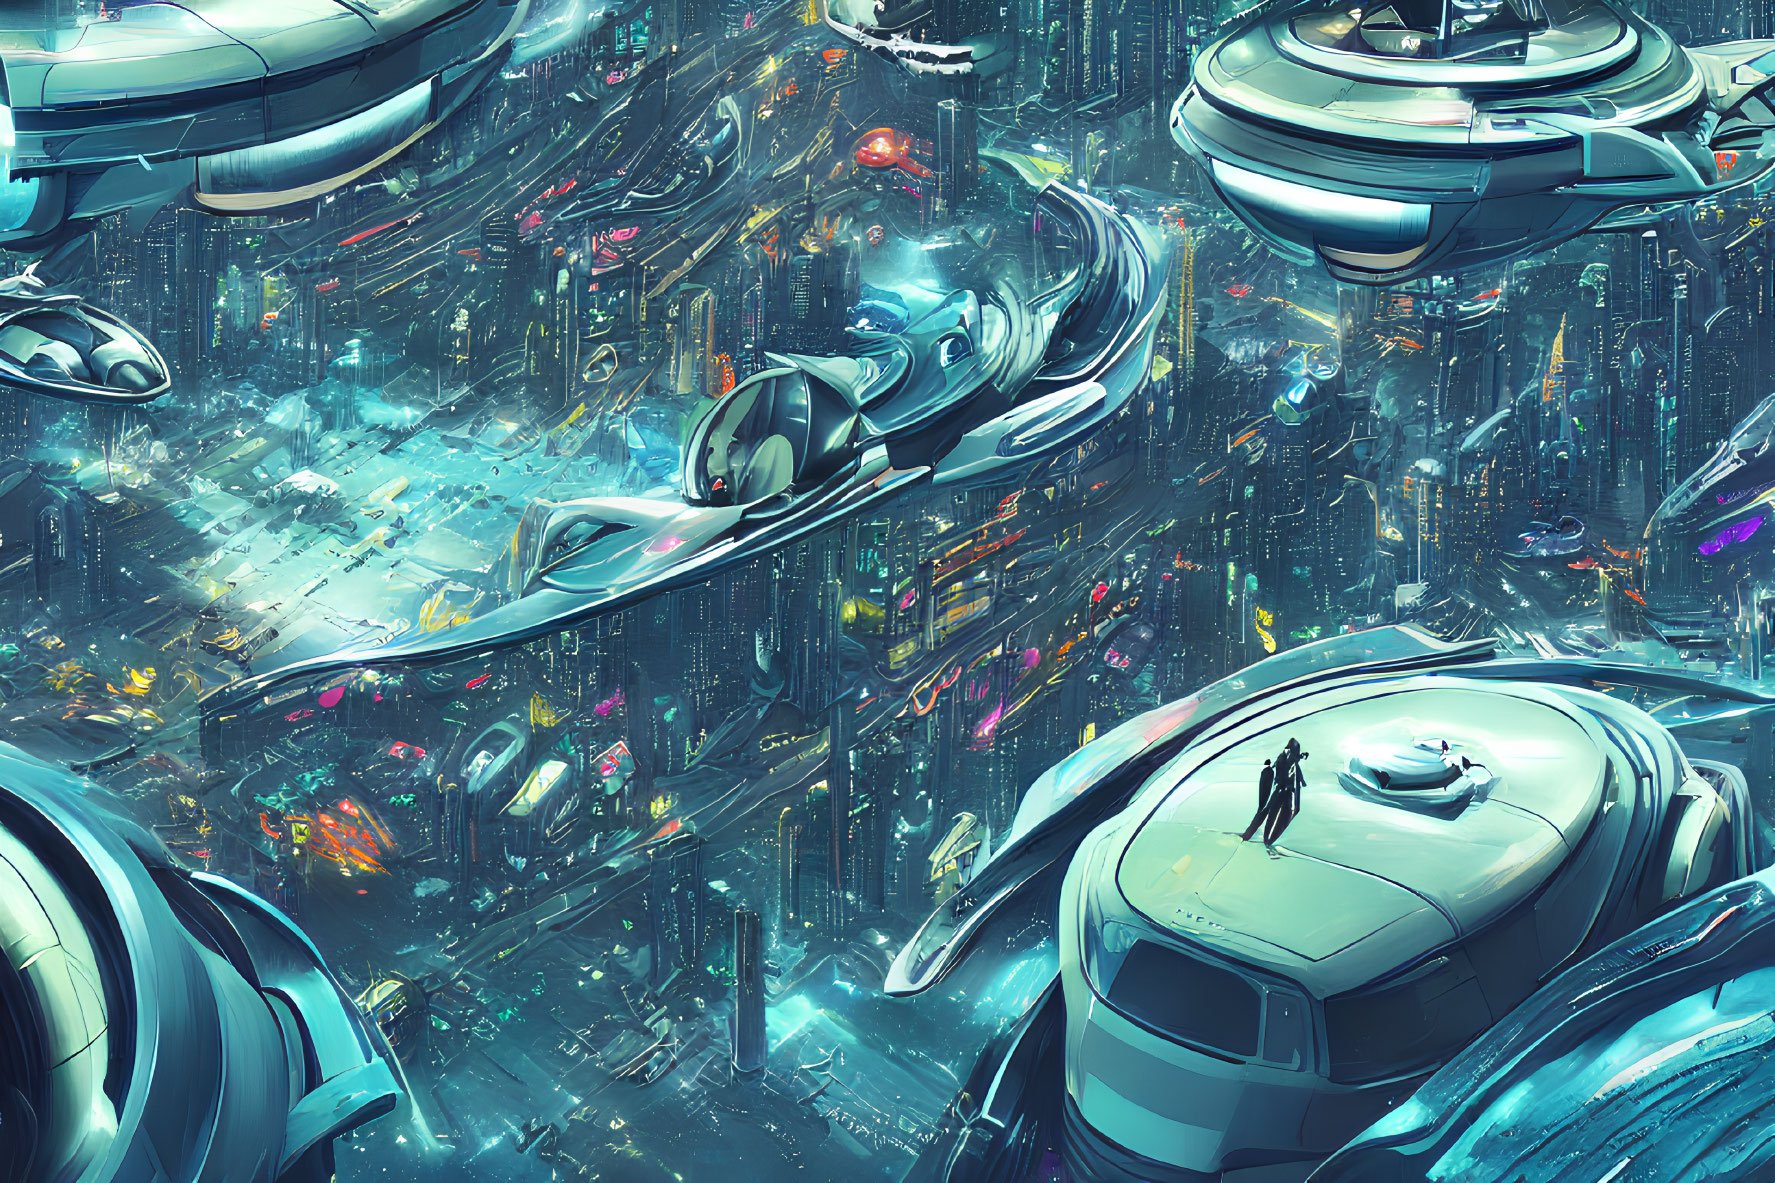 Futuristic cityscape with flying vehicles and neon lights